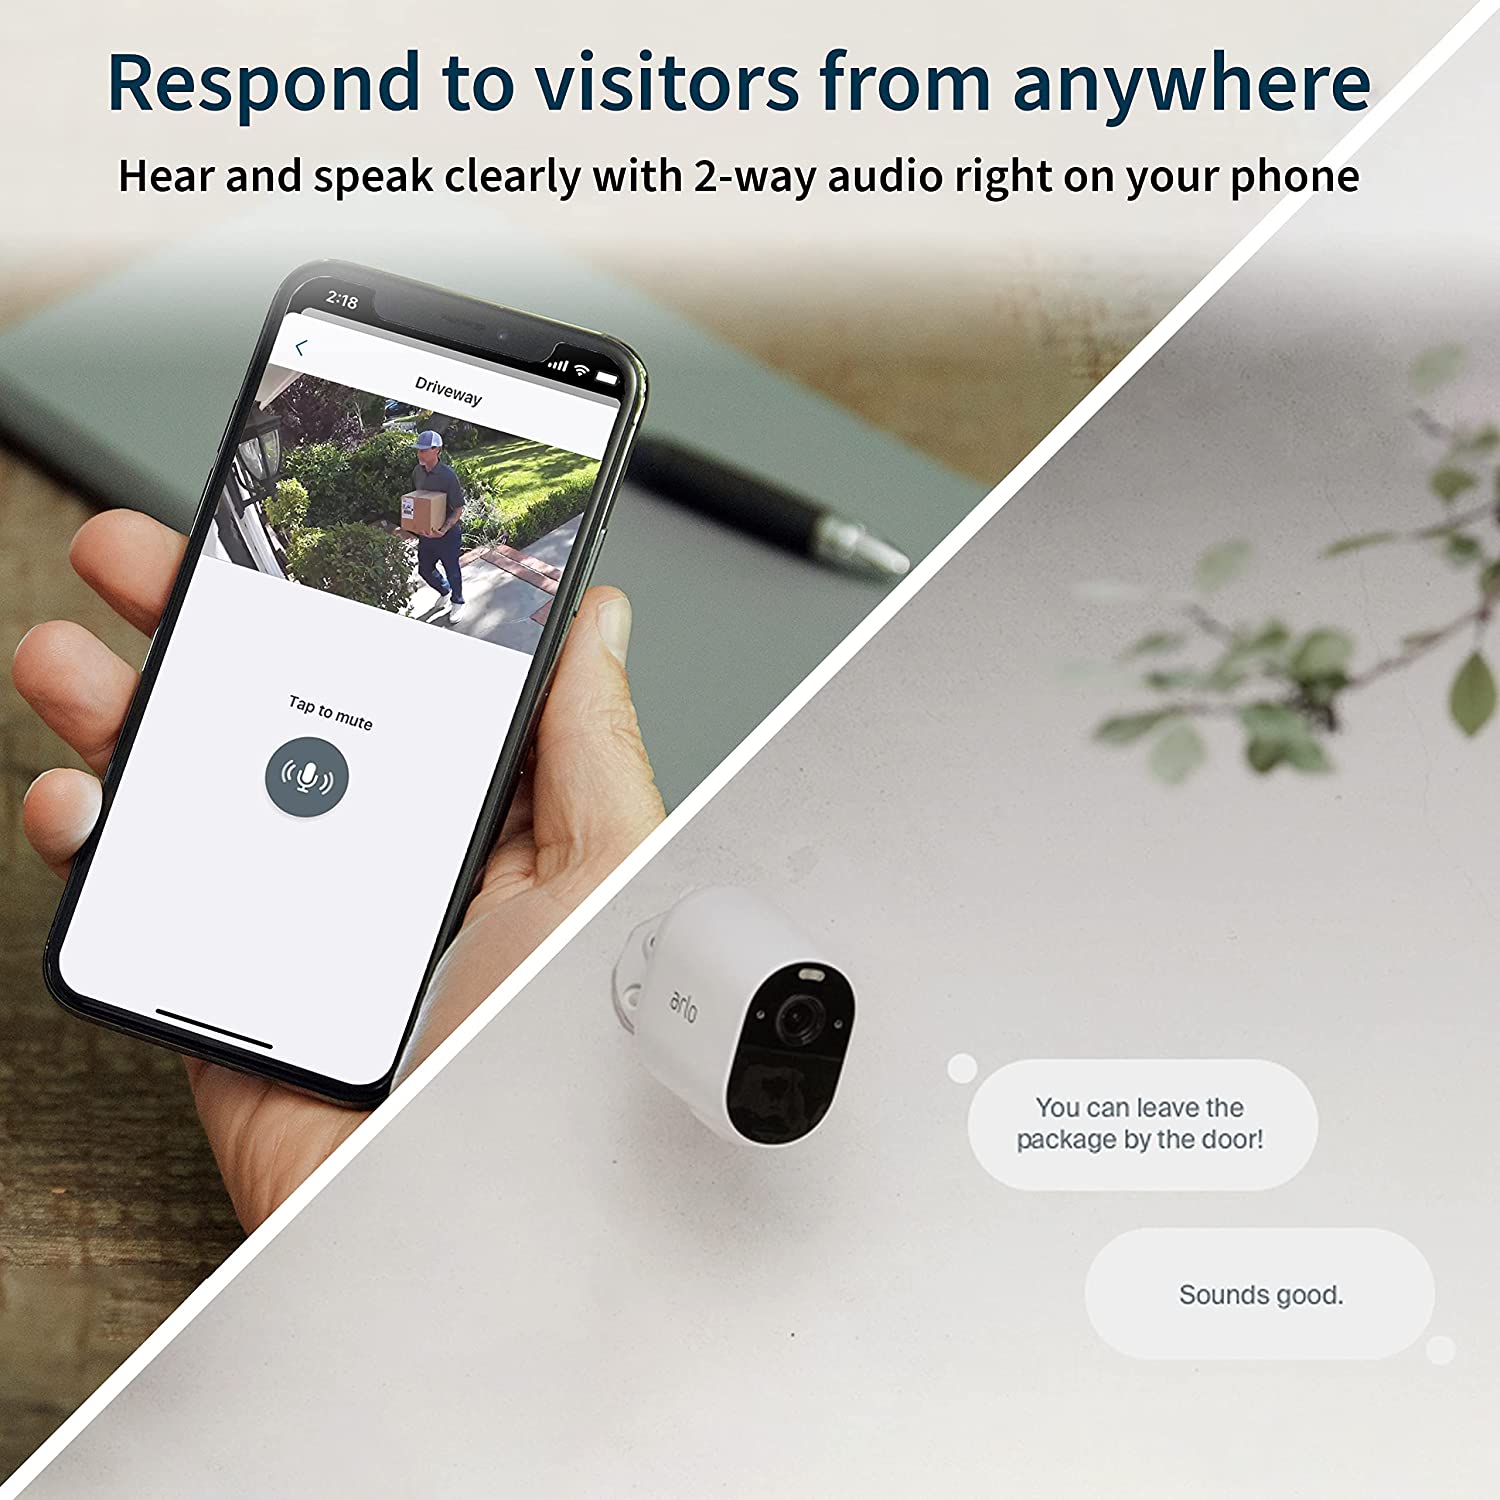 Arlo Essential Spotlight Camera - 1 Pack - Wireless Security, 1080p Video, Color Night Vision, 2 Way Audio, Wire-Free, Direct to WiFi No Hub Needed, Works with Alexa, White - VMC2030